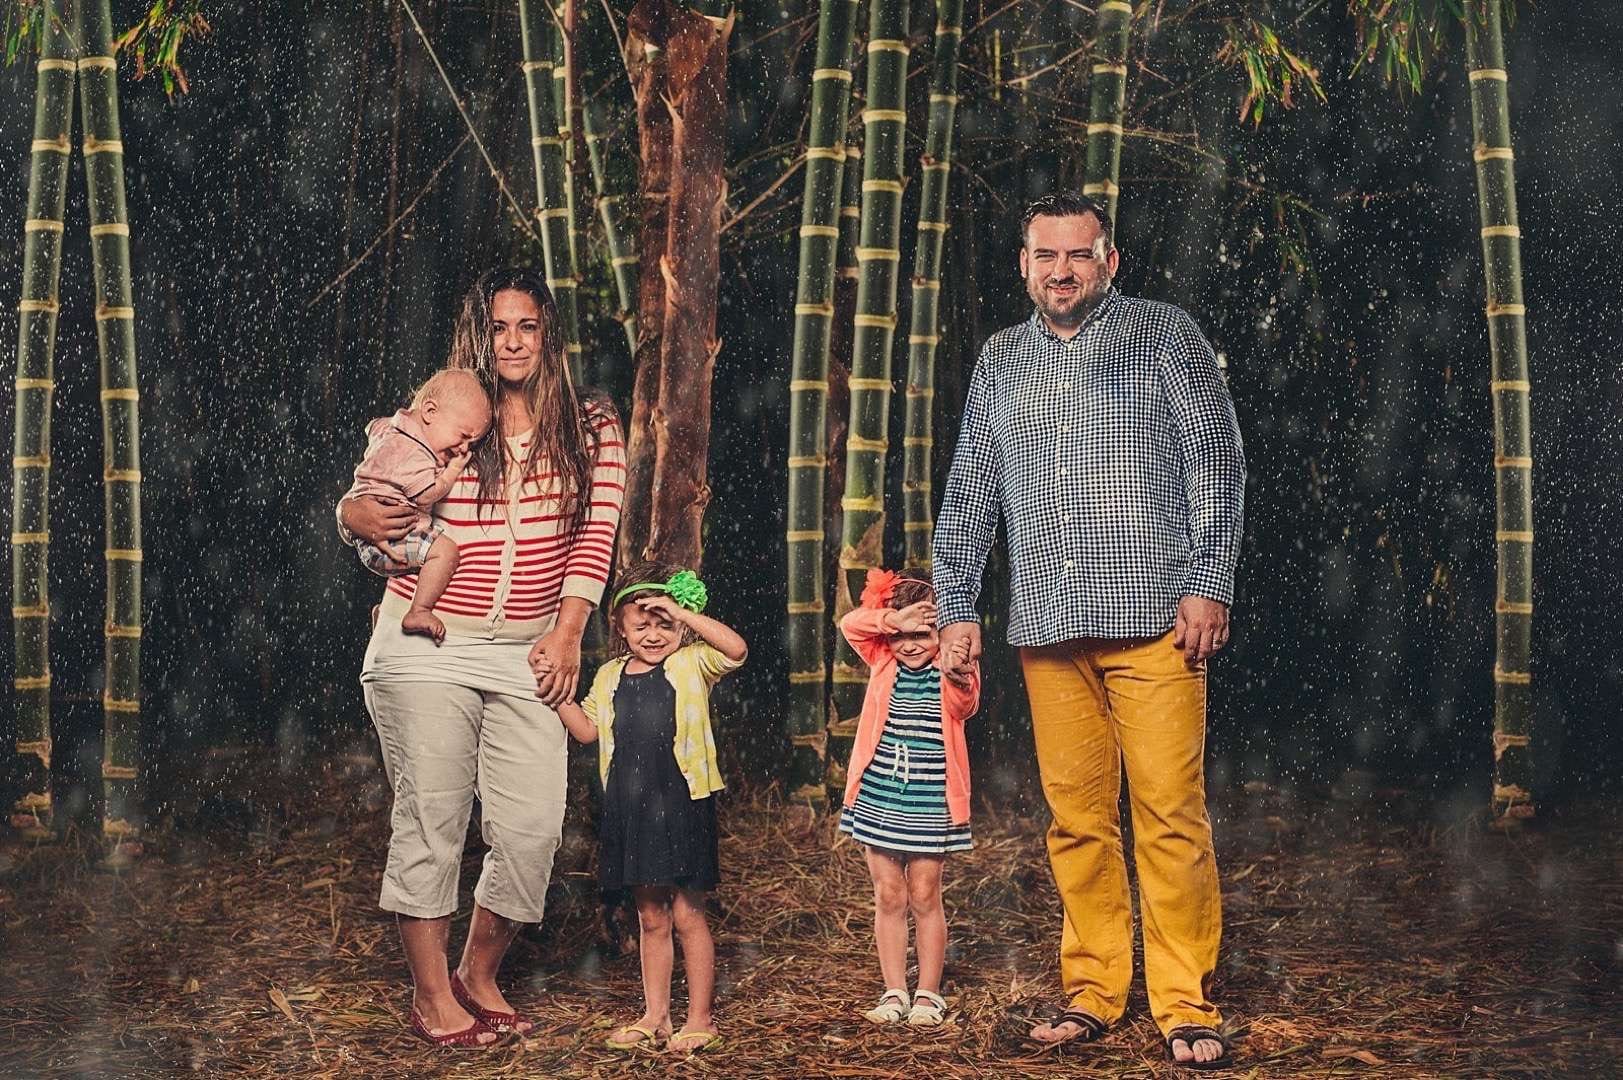 A Series of Unfortunate Family Portraits showing a family with three small children amongst palm trees posting for camera in bright lights.